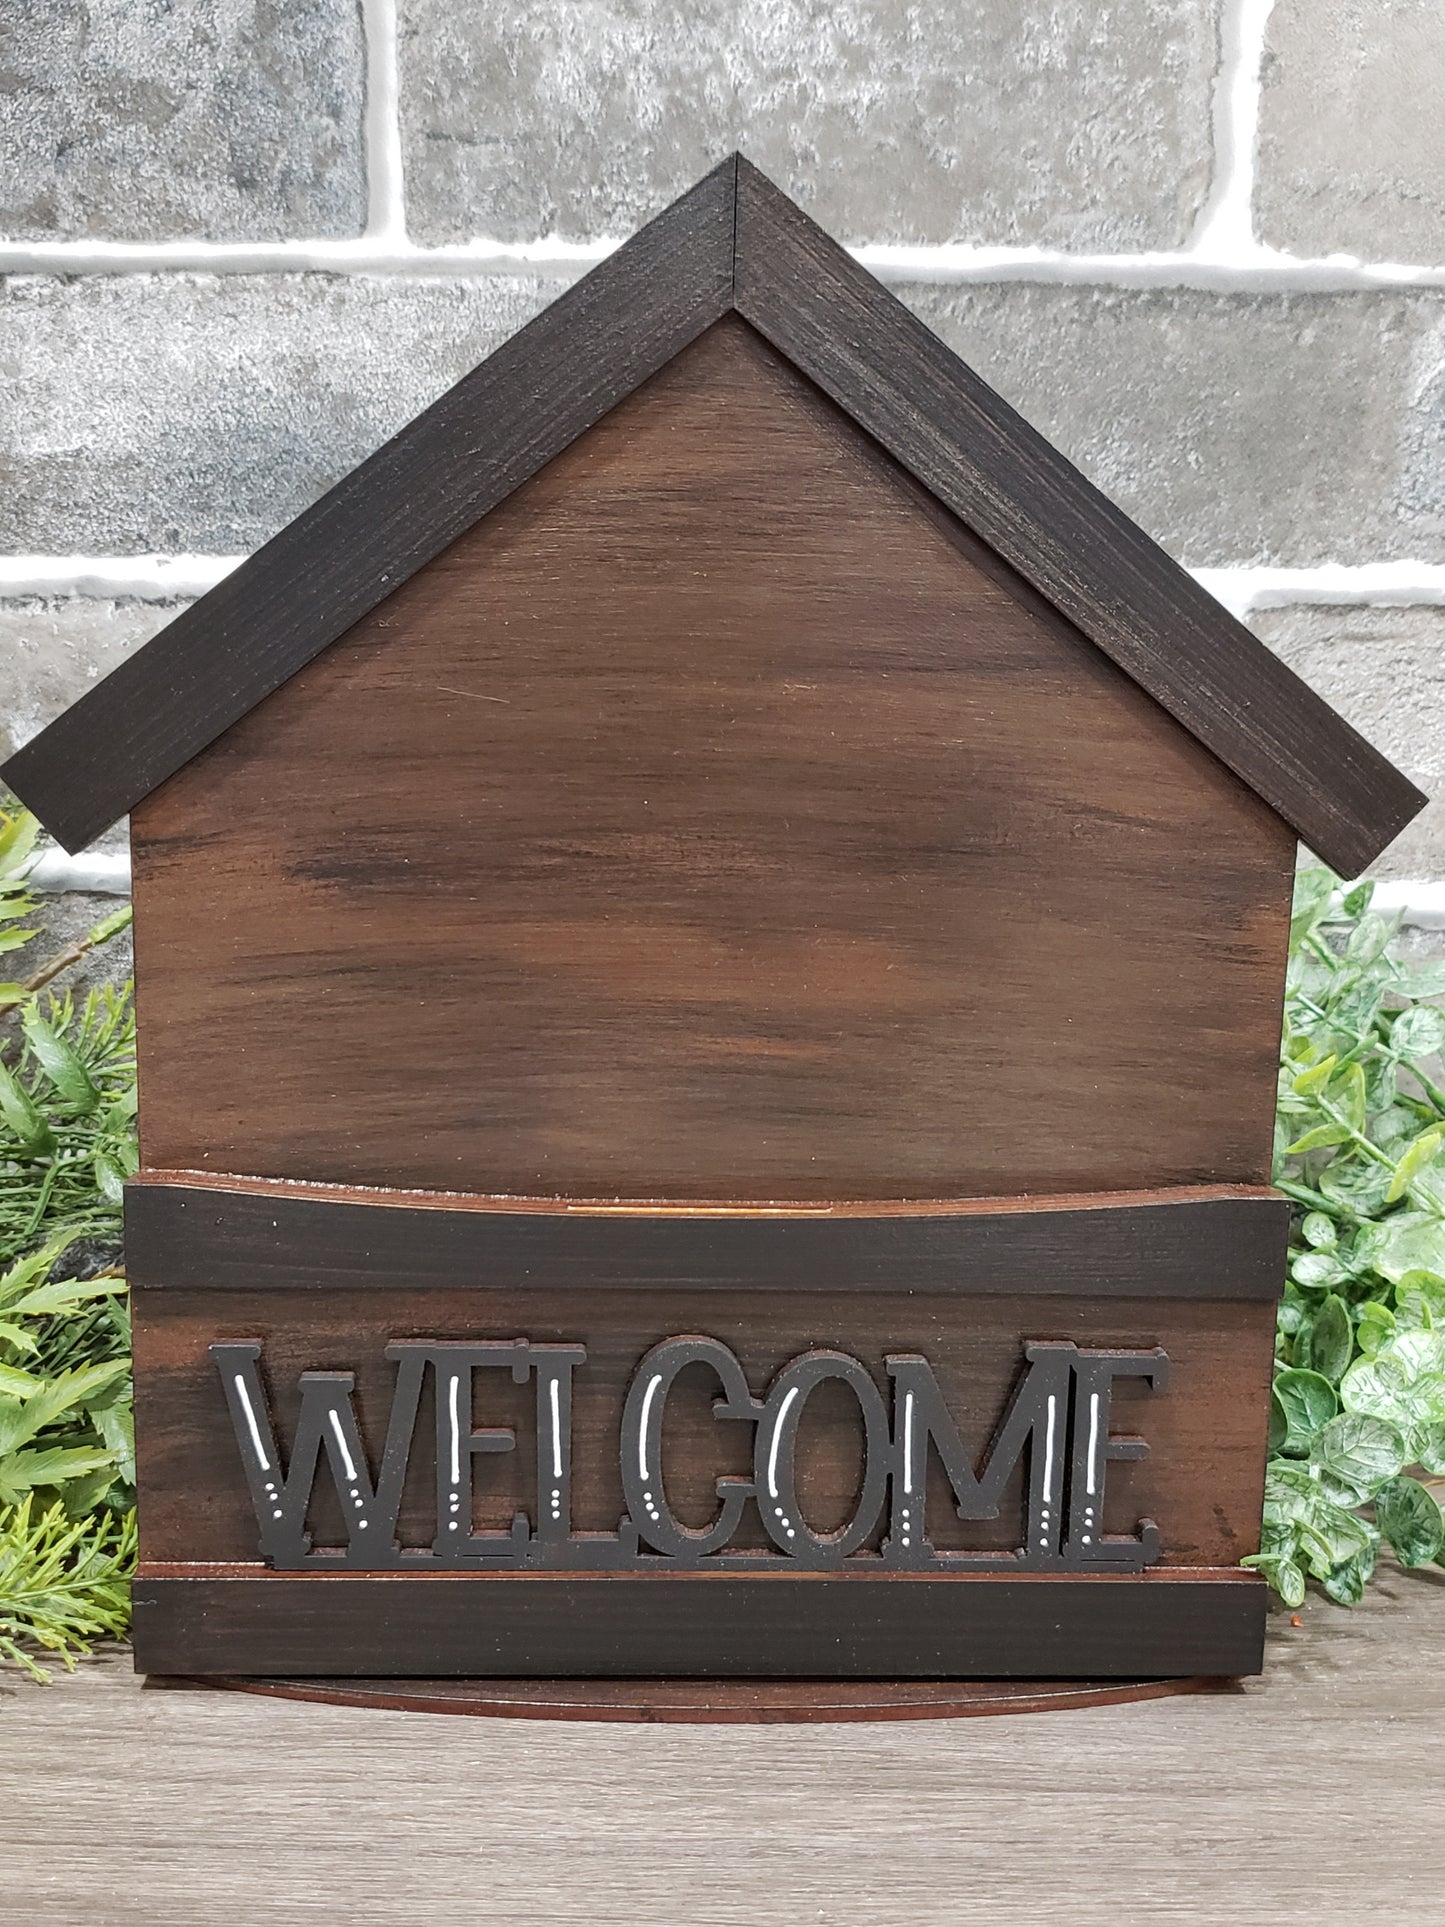 Interchangeable House Base: Words